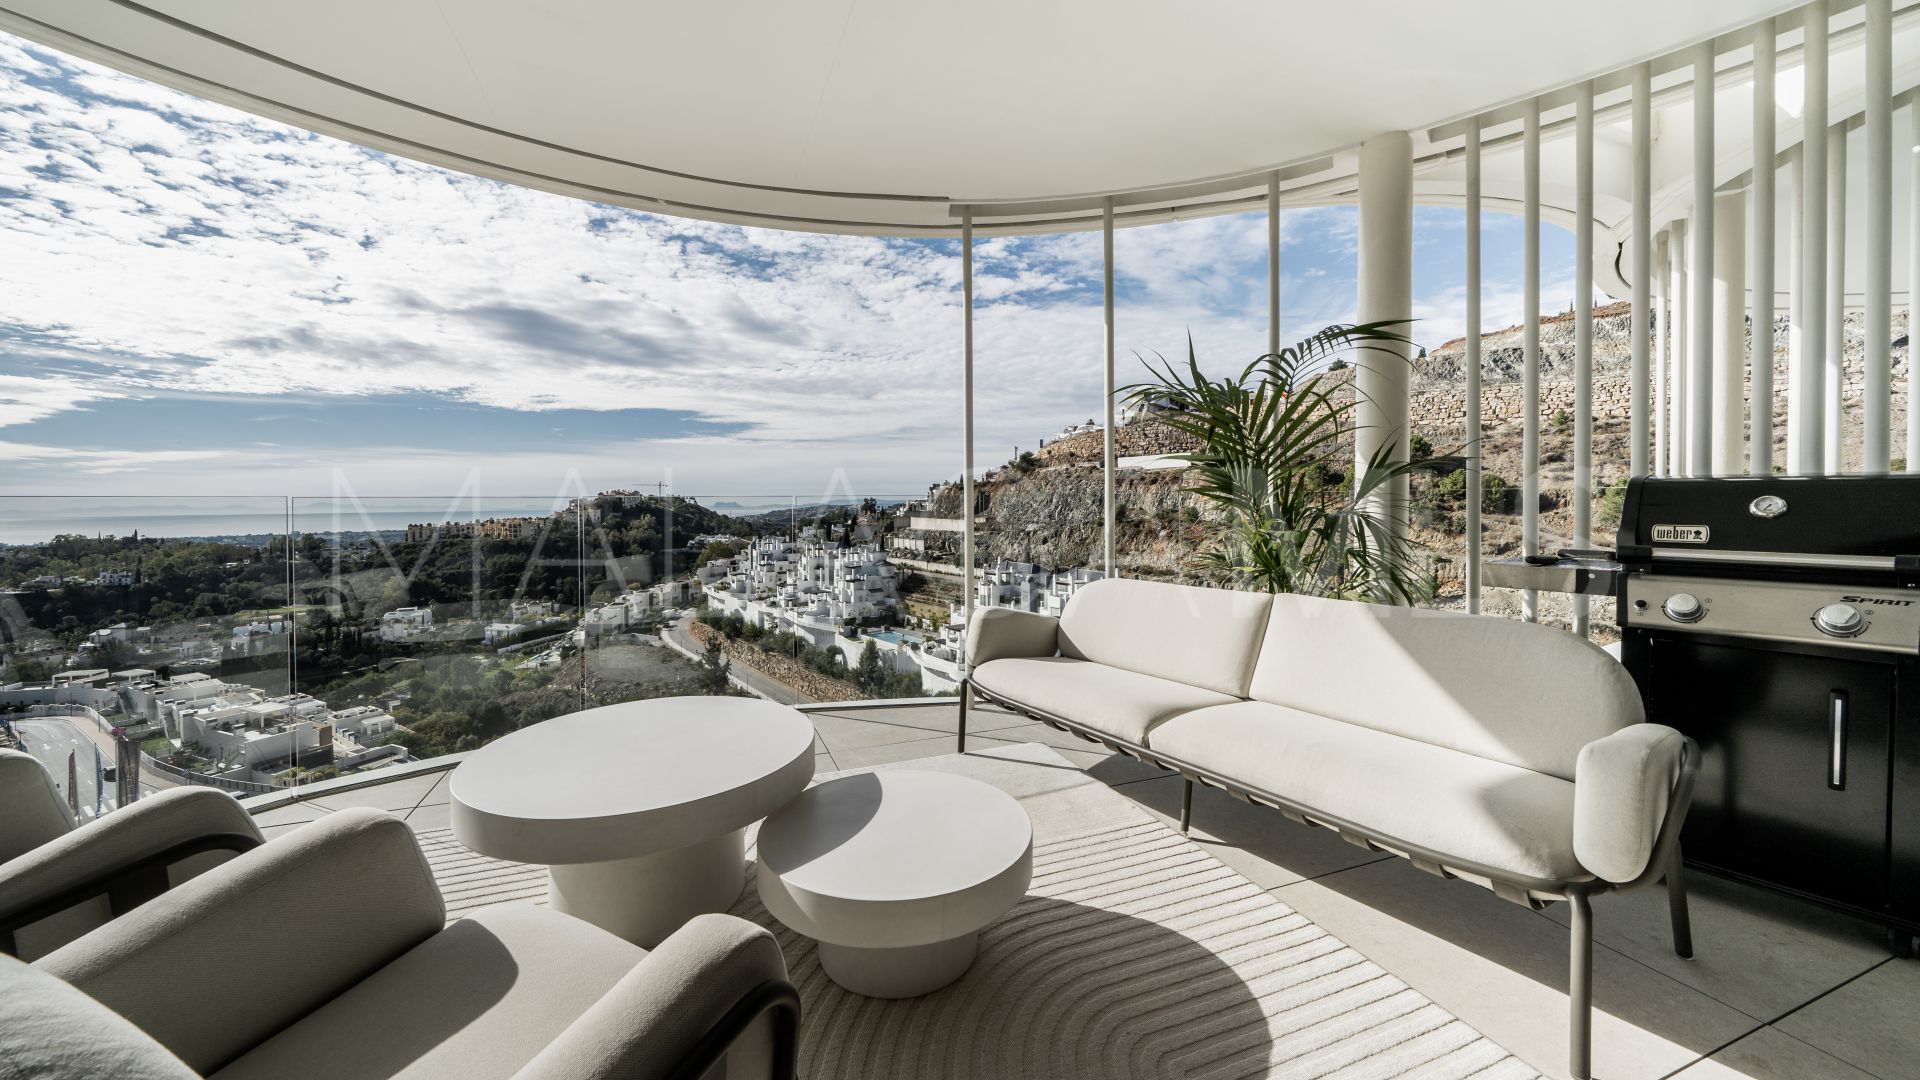 2 bedrooms The View Marbella apartment for sale